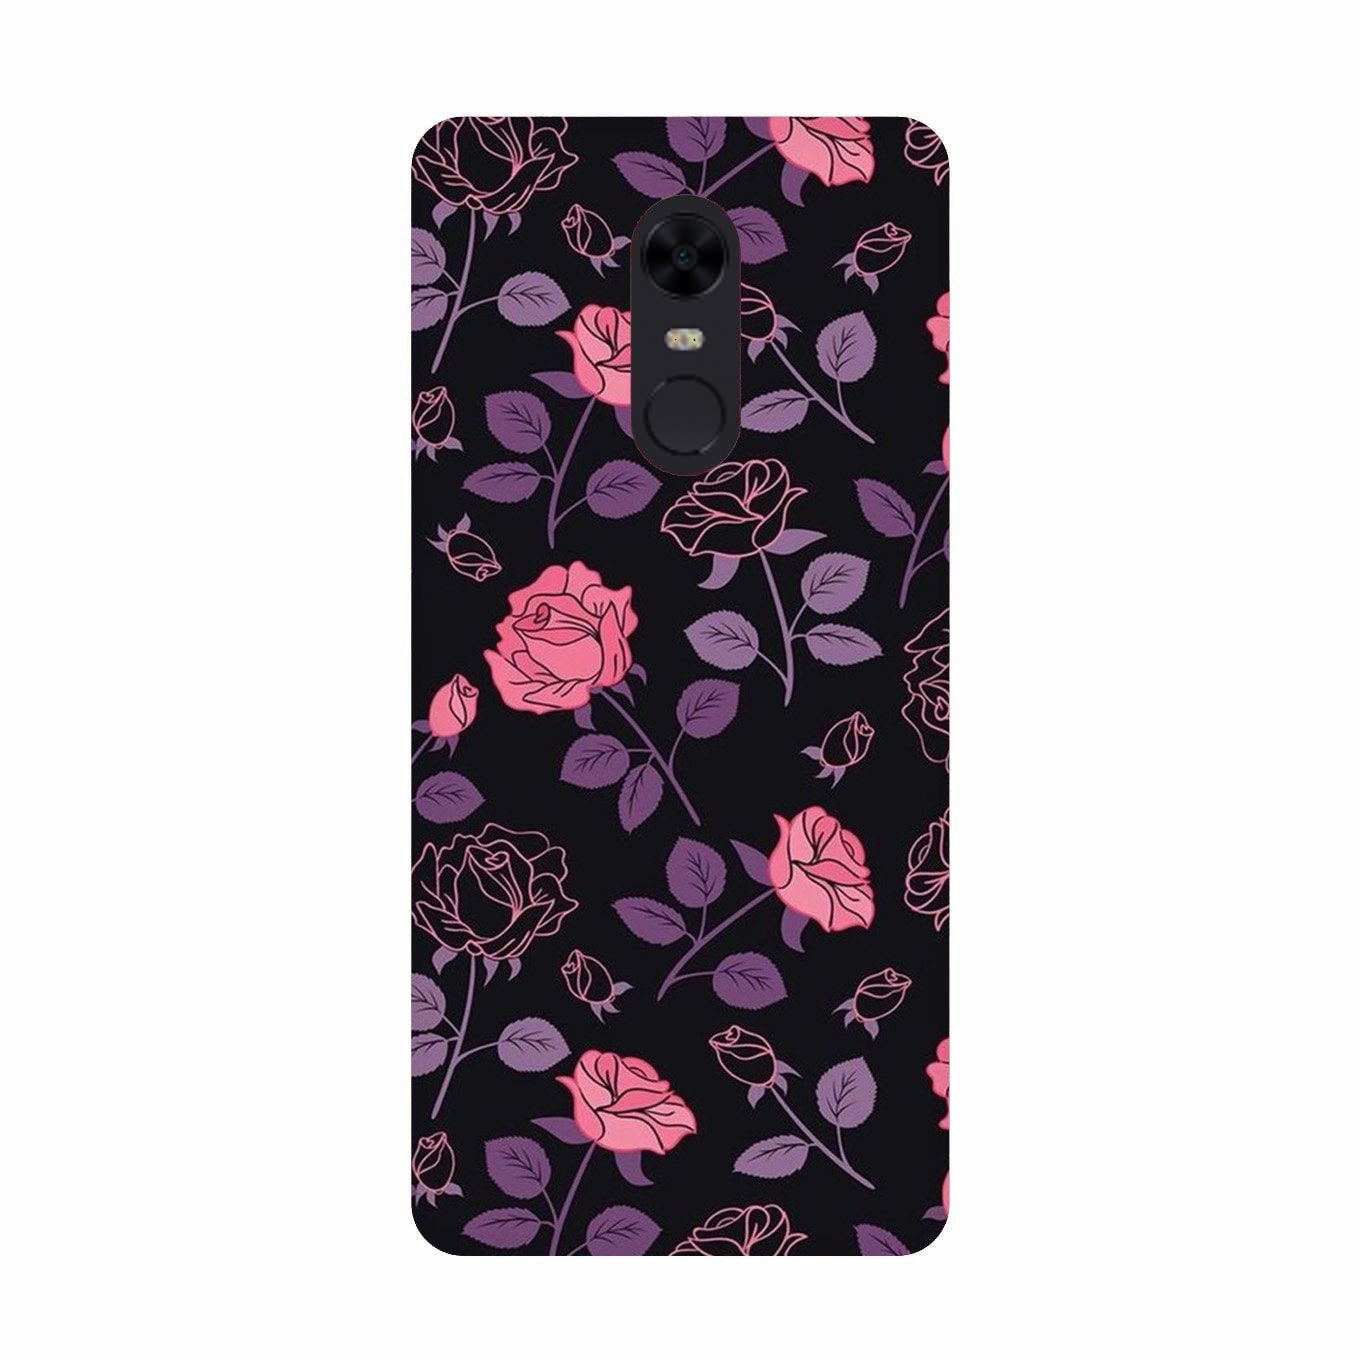 Rose Pattern Case for Redmi Note 5